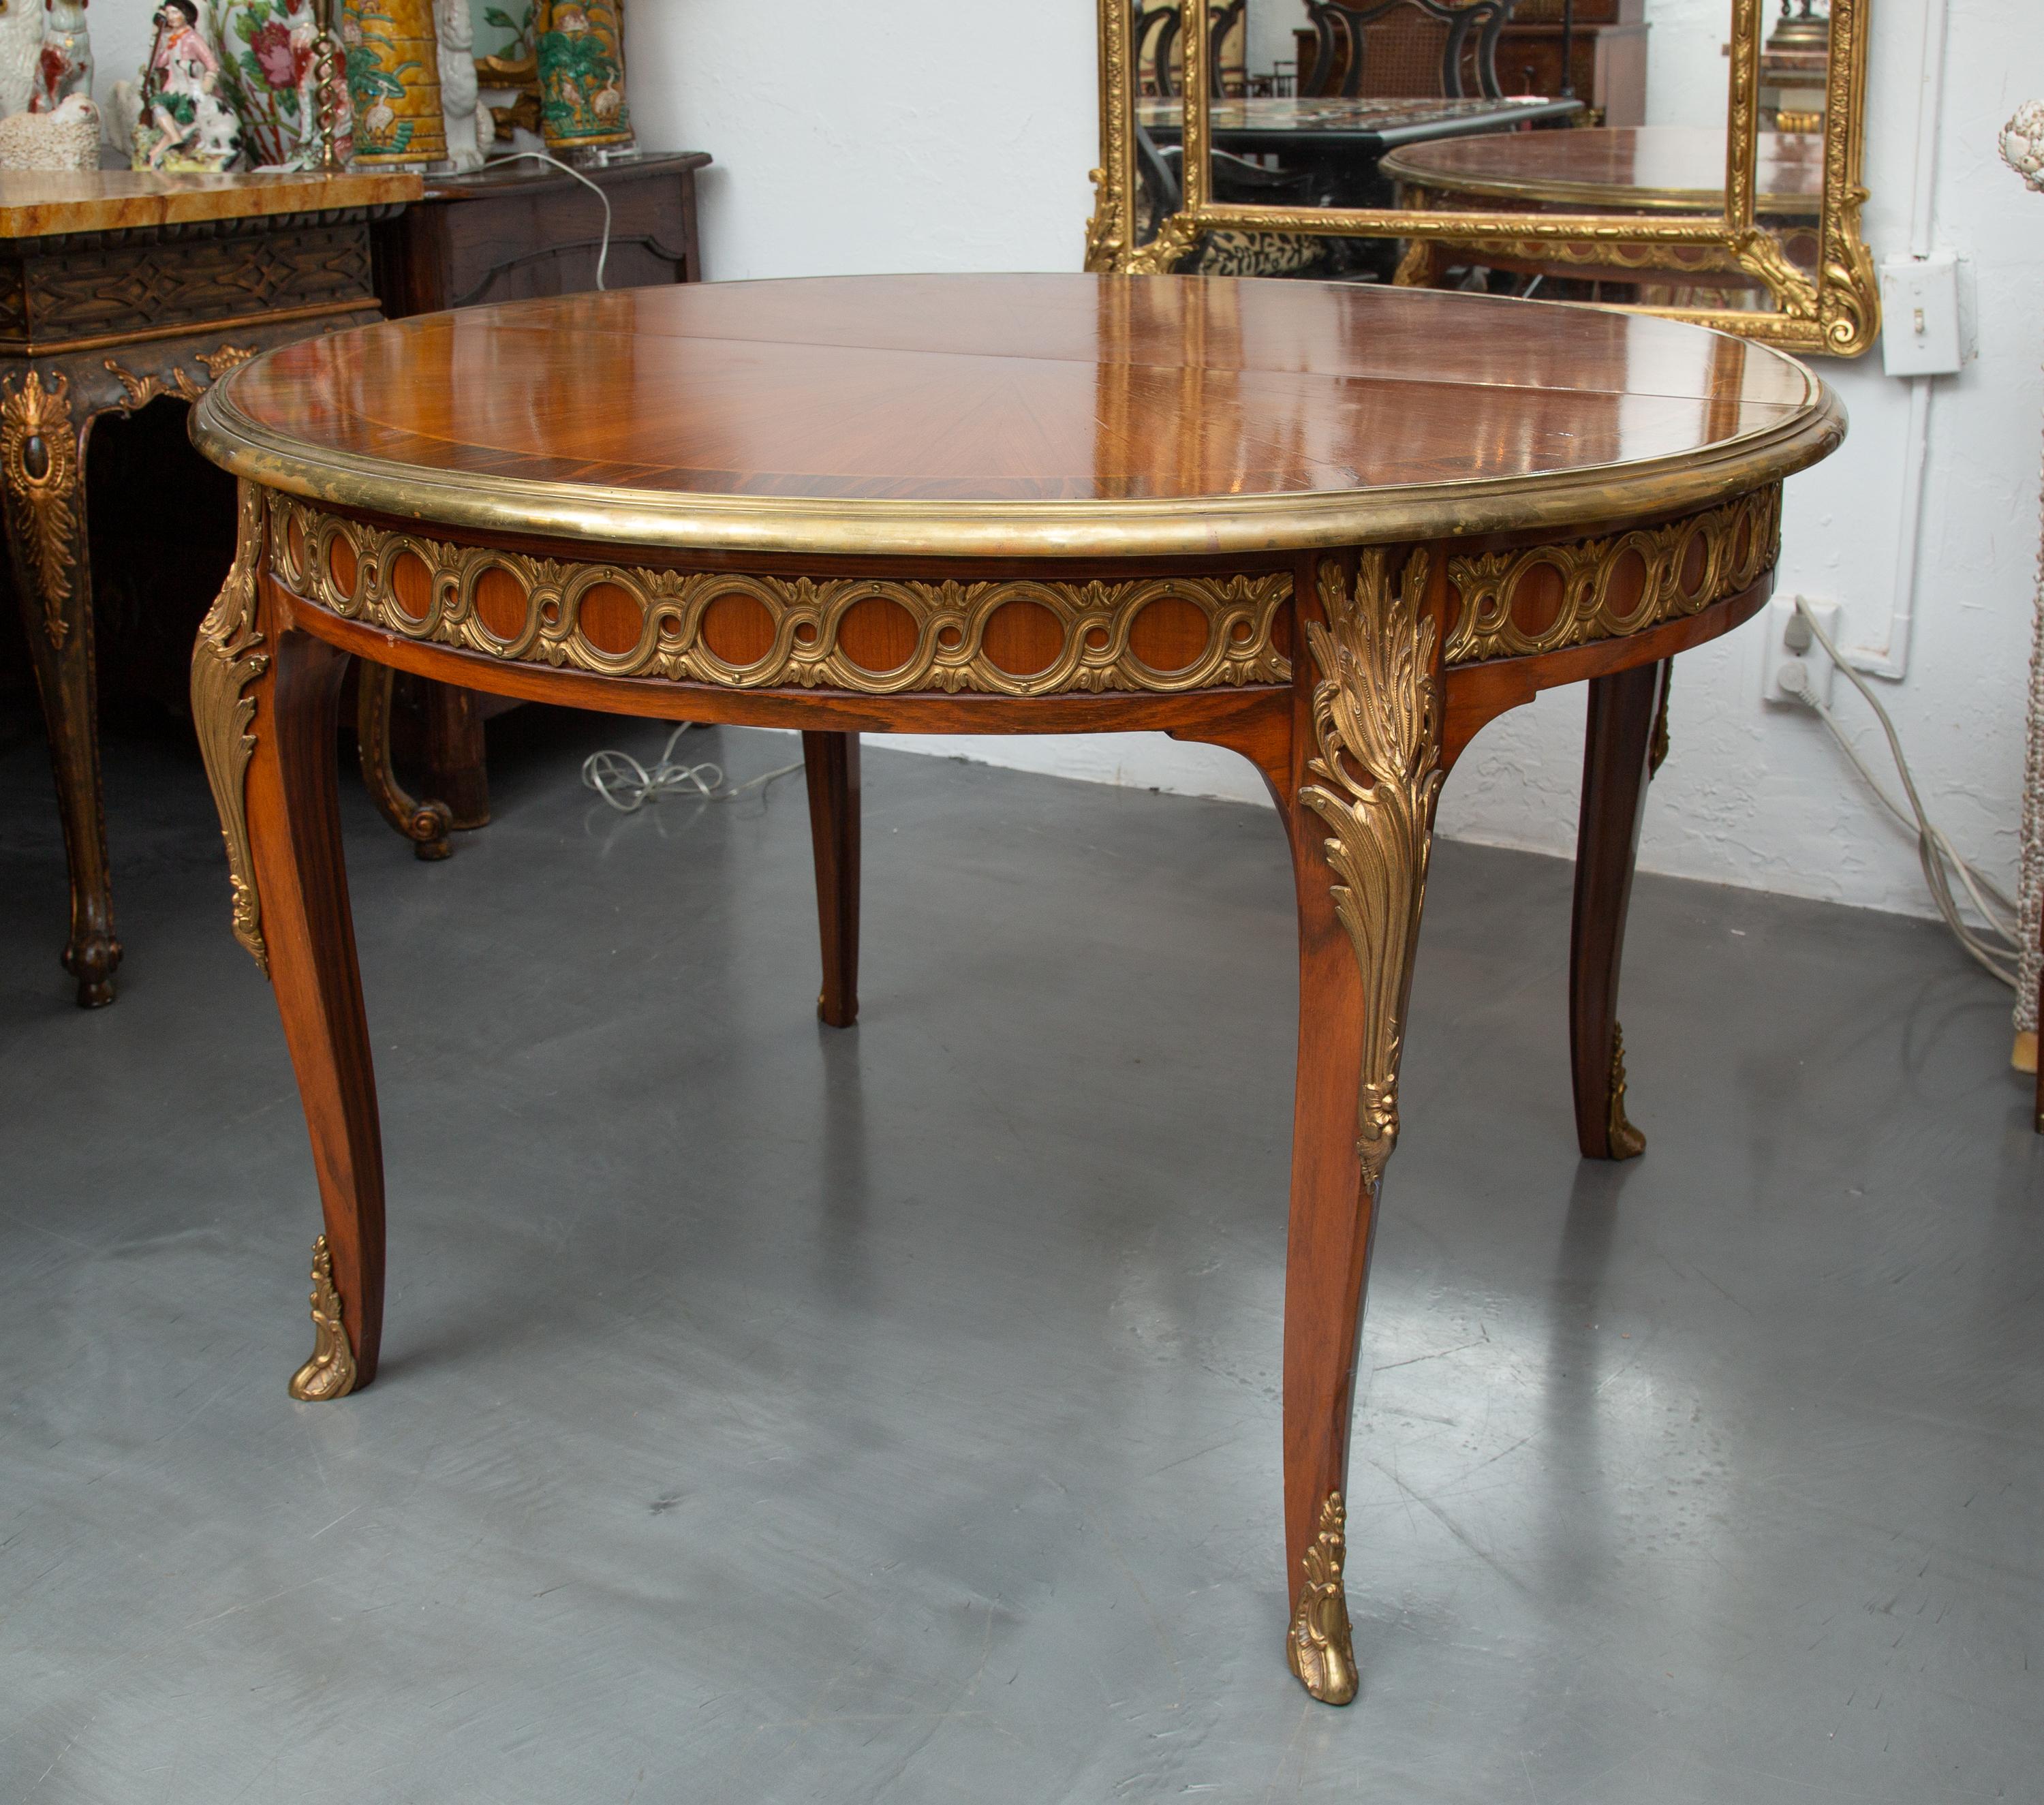 This is a lovely French Louis XV style dining table, the mahogany top banded with rosewood and brass-banded edge, above frieze with interlocking circle ornamentation, supported by four cabriole legs with gilt metal mounts on the knees and